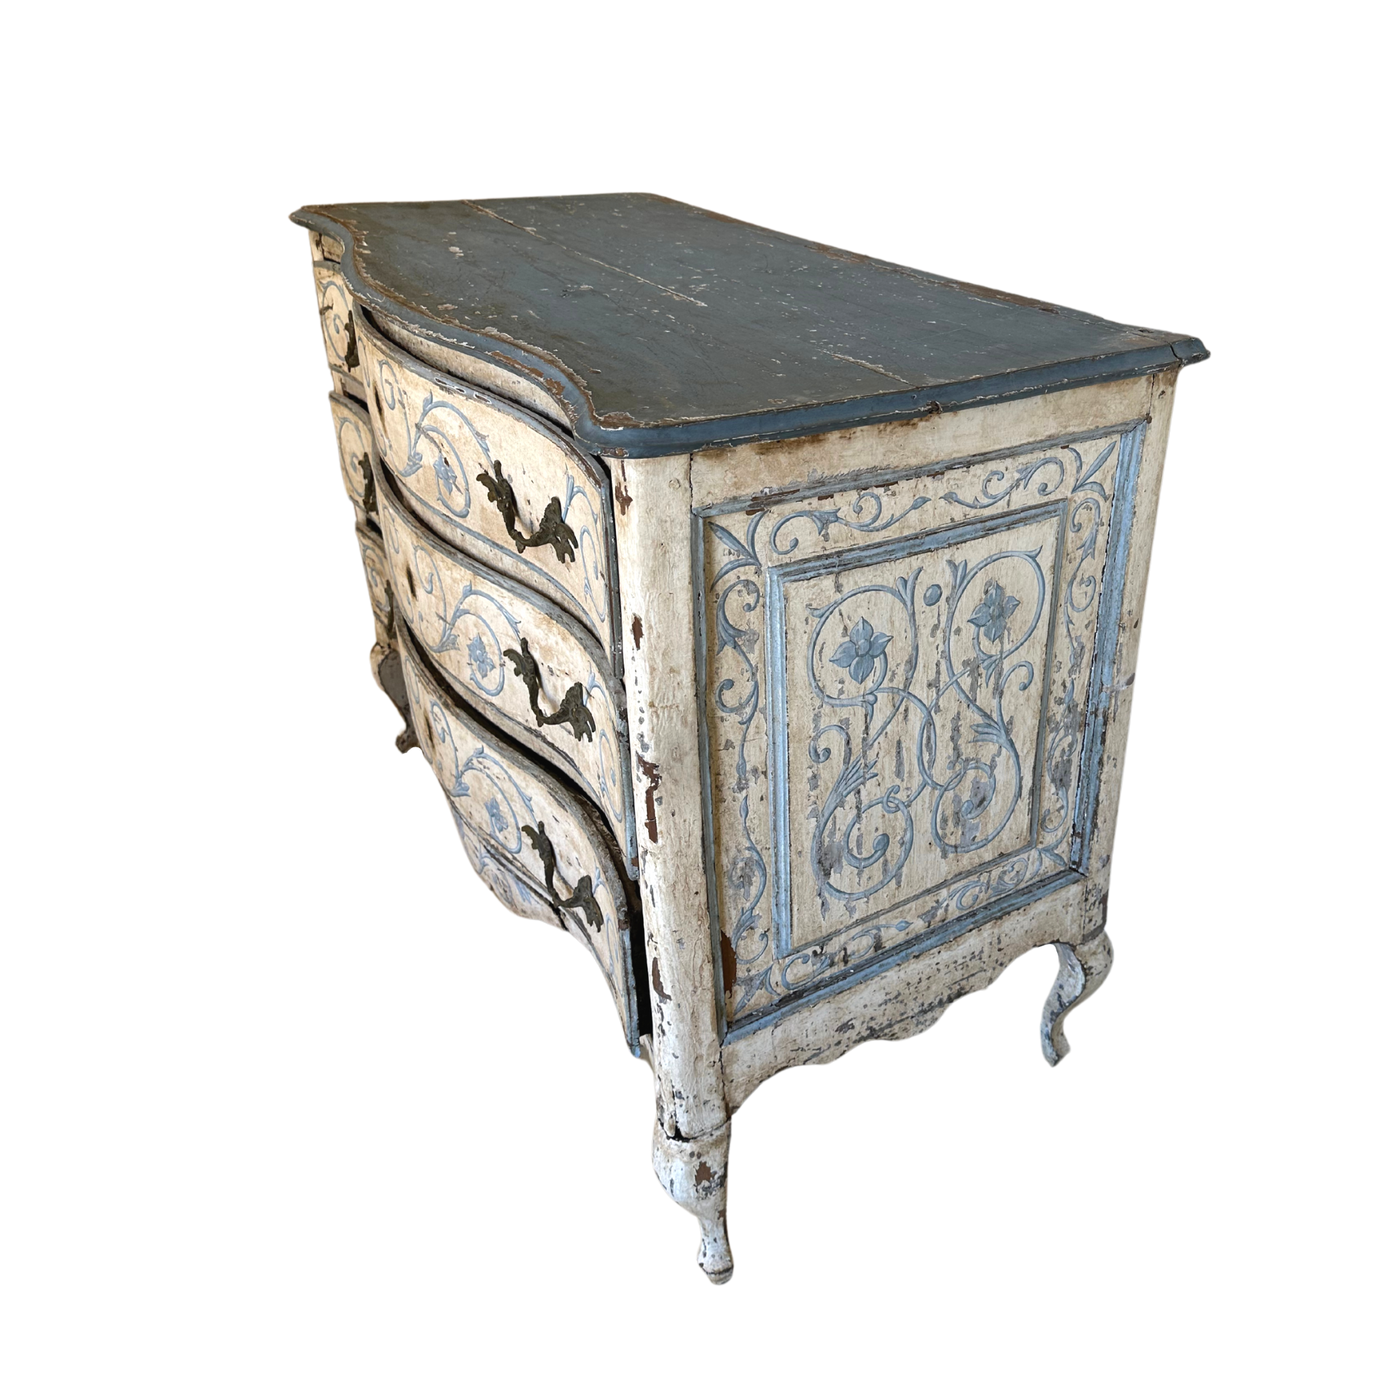 Antique Handpainted French Commode c. 1760